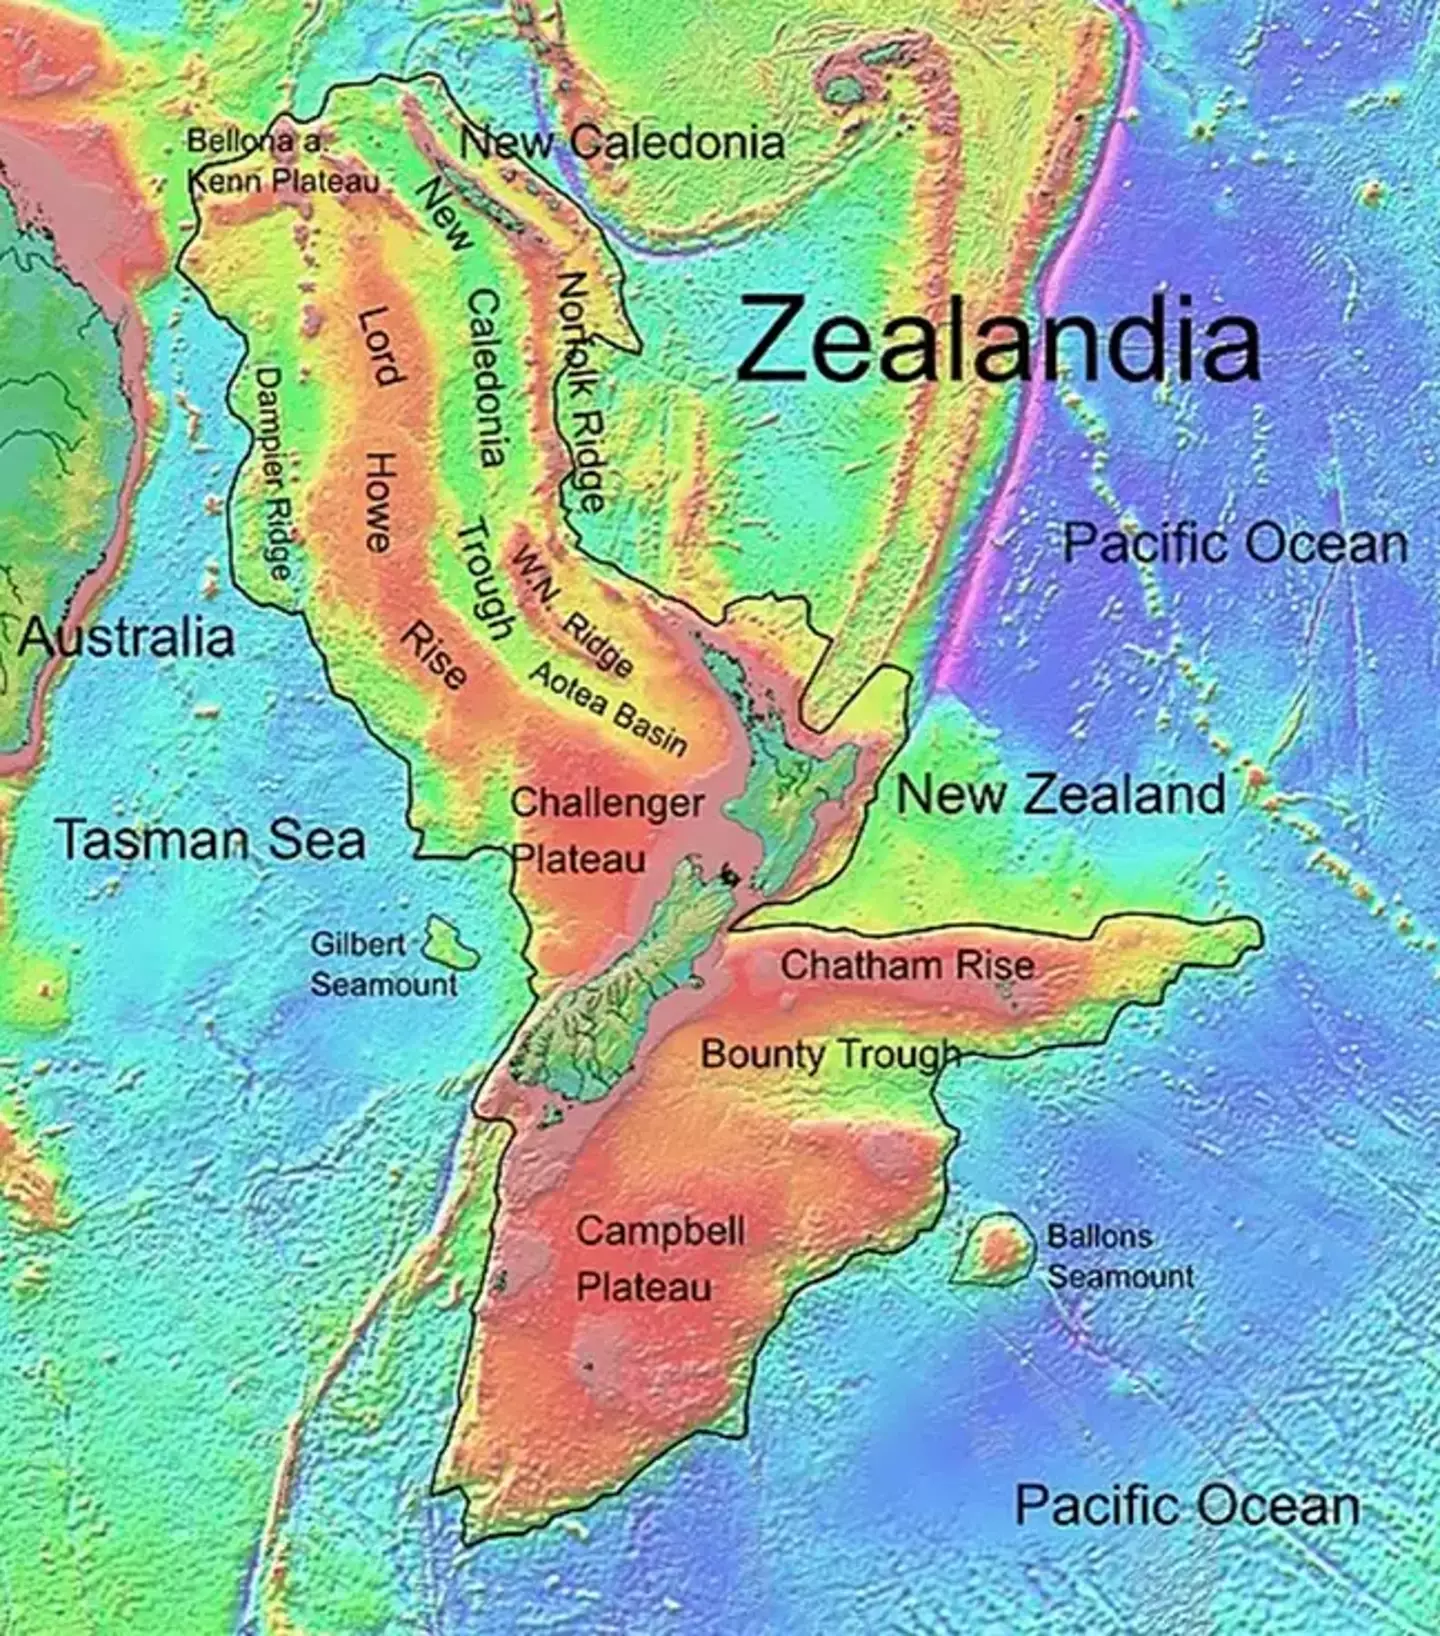 Zealandia - known by its Māori name Te Riu-a-Māui - is over a billion-years-old and we somehow managed to lose it.